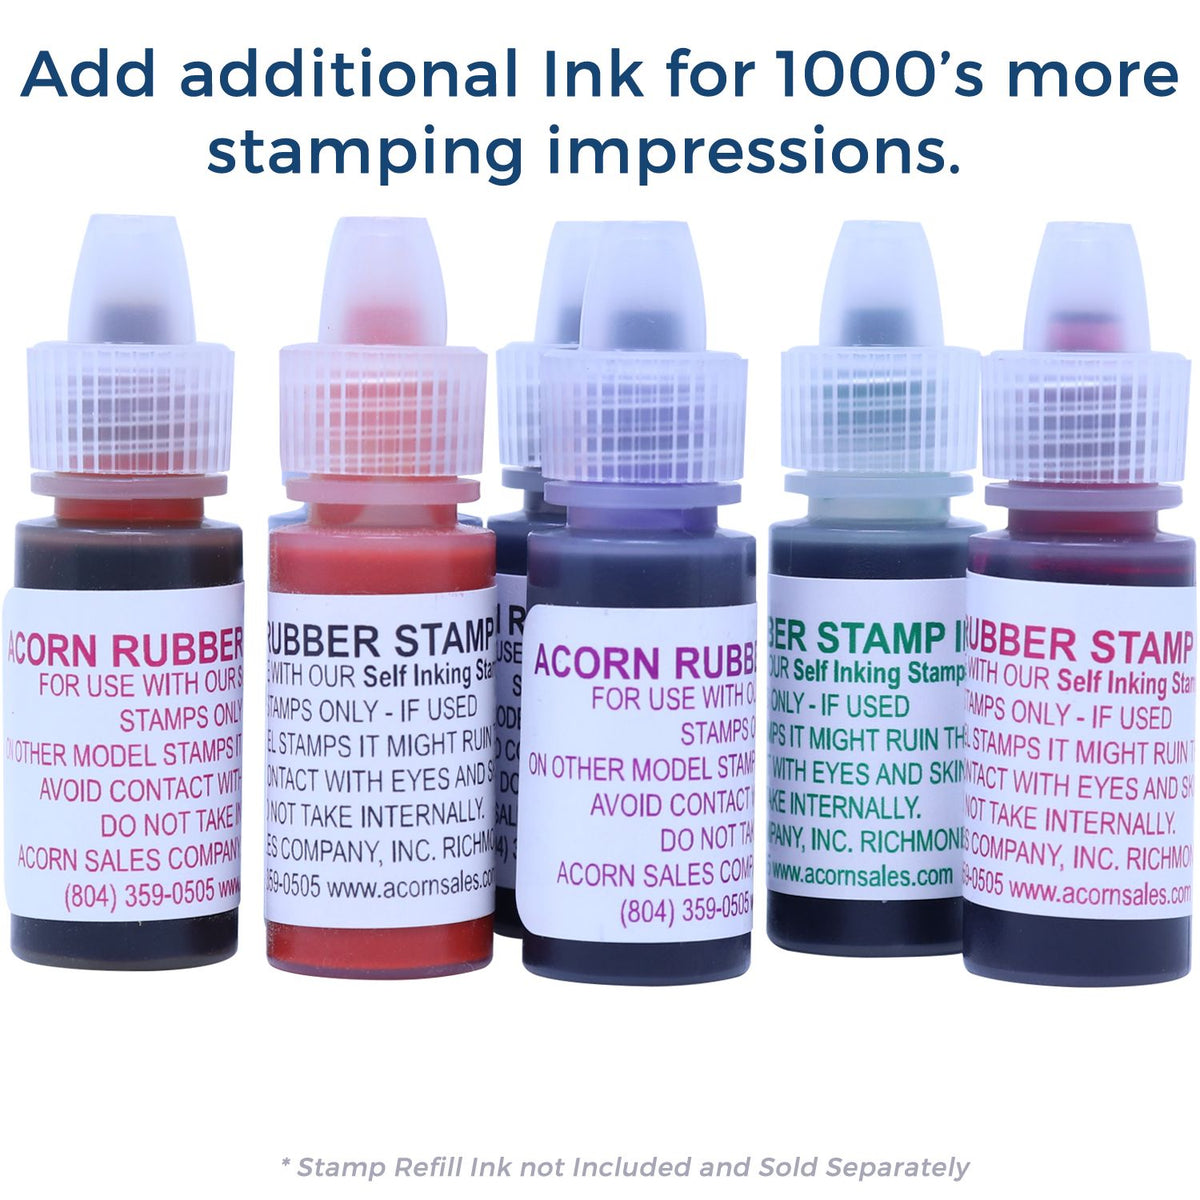 Refill Ink for Self-Inking Round Please Return to Classroom Stamp Available